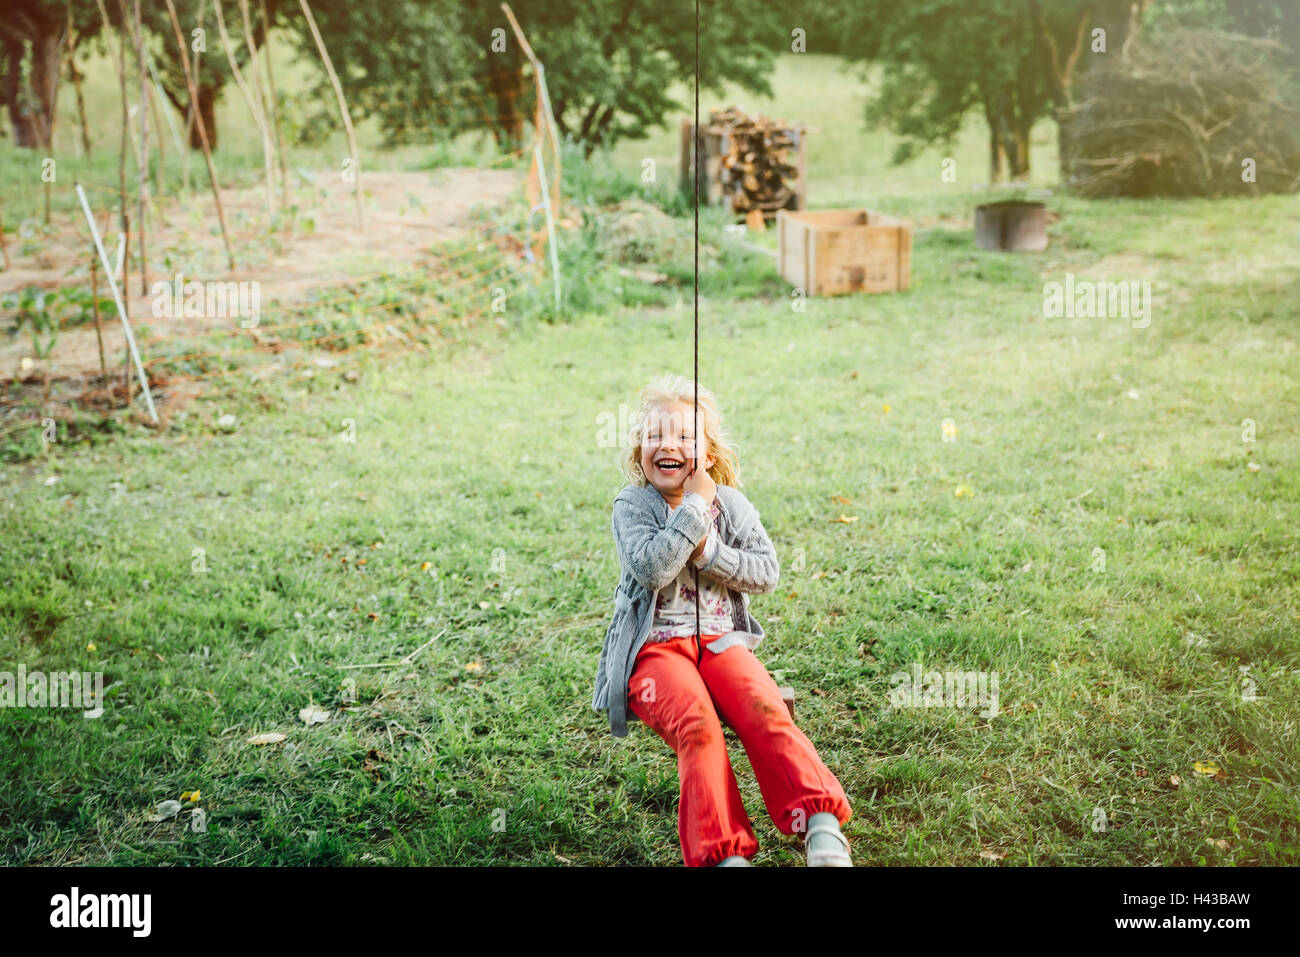 Smiling Caucasian girl on rope swing Banque D'Images